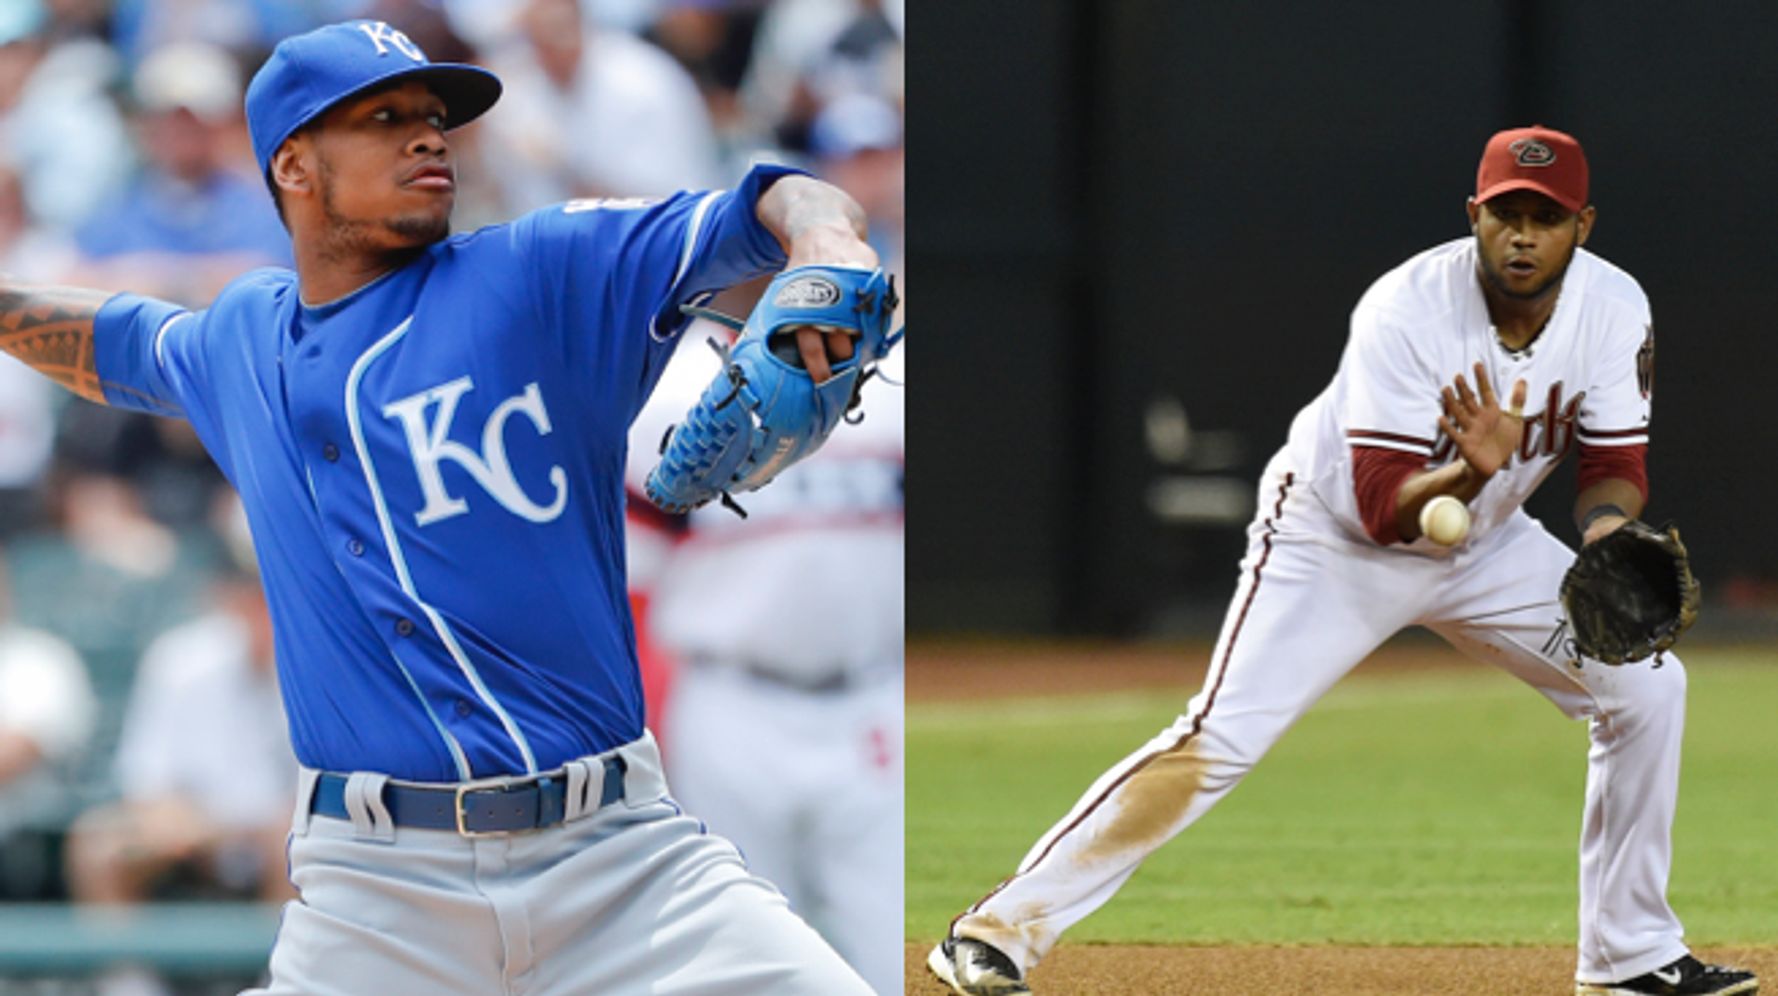 Royals pitcher Yordano Ventura, ex-player Andy Marte killed in